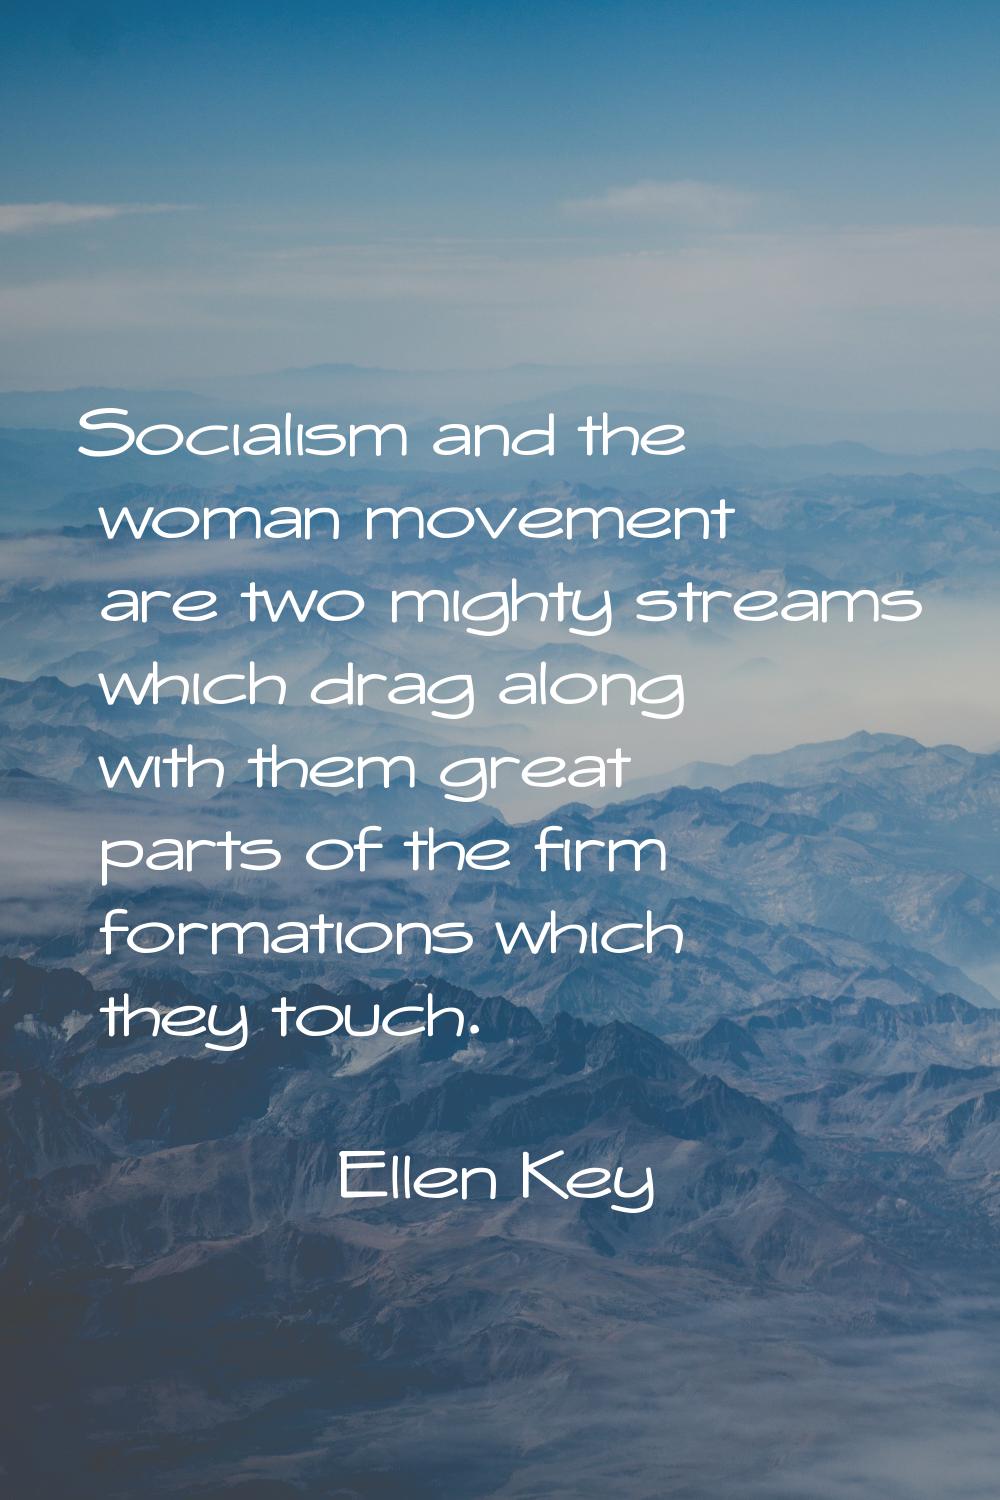 Socialism and the woman movement are two mighty streams which drag along with them great parts of t